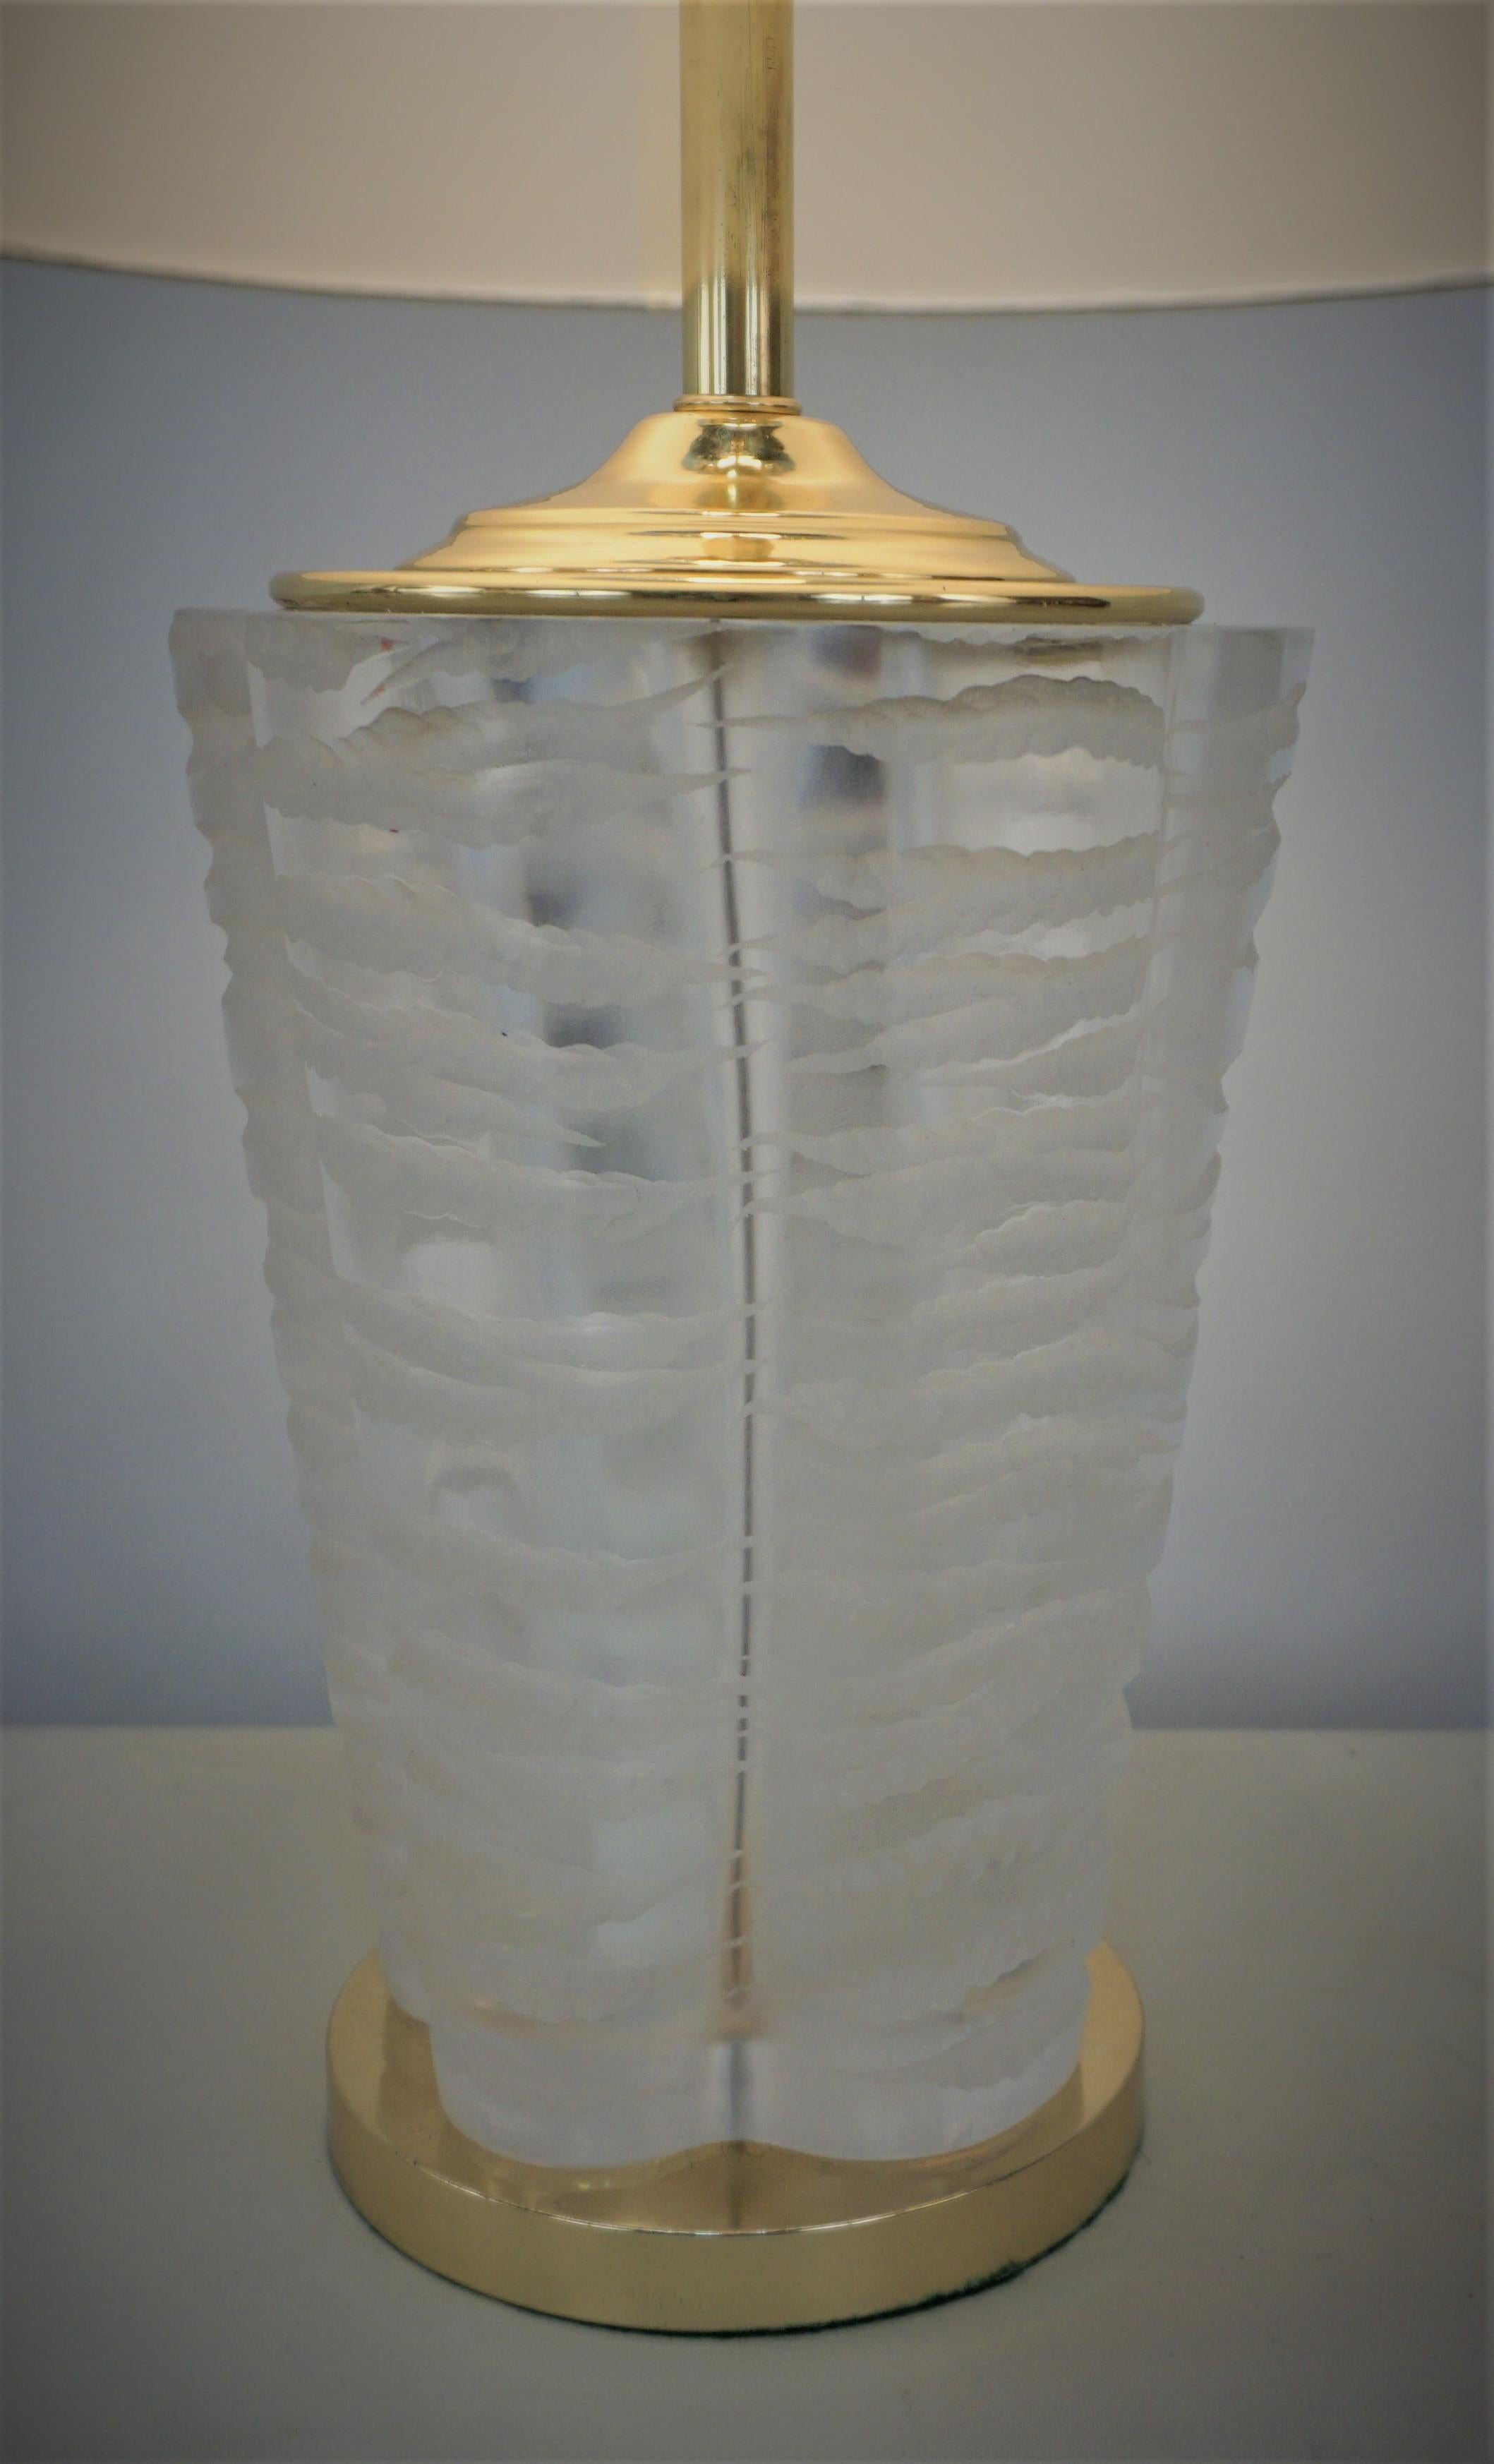 Fabulous, customized crystal table made of a heavy, six-sided clear Lalique (Marc Lalique) vase with heavy, deep frosted cuts. This exquisite piece is finished with a polished bronze base and hardware.
Fitted with hardback silk lampshade.